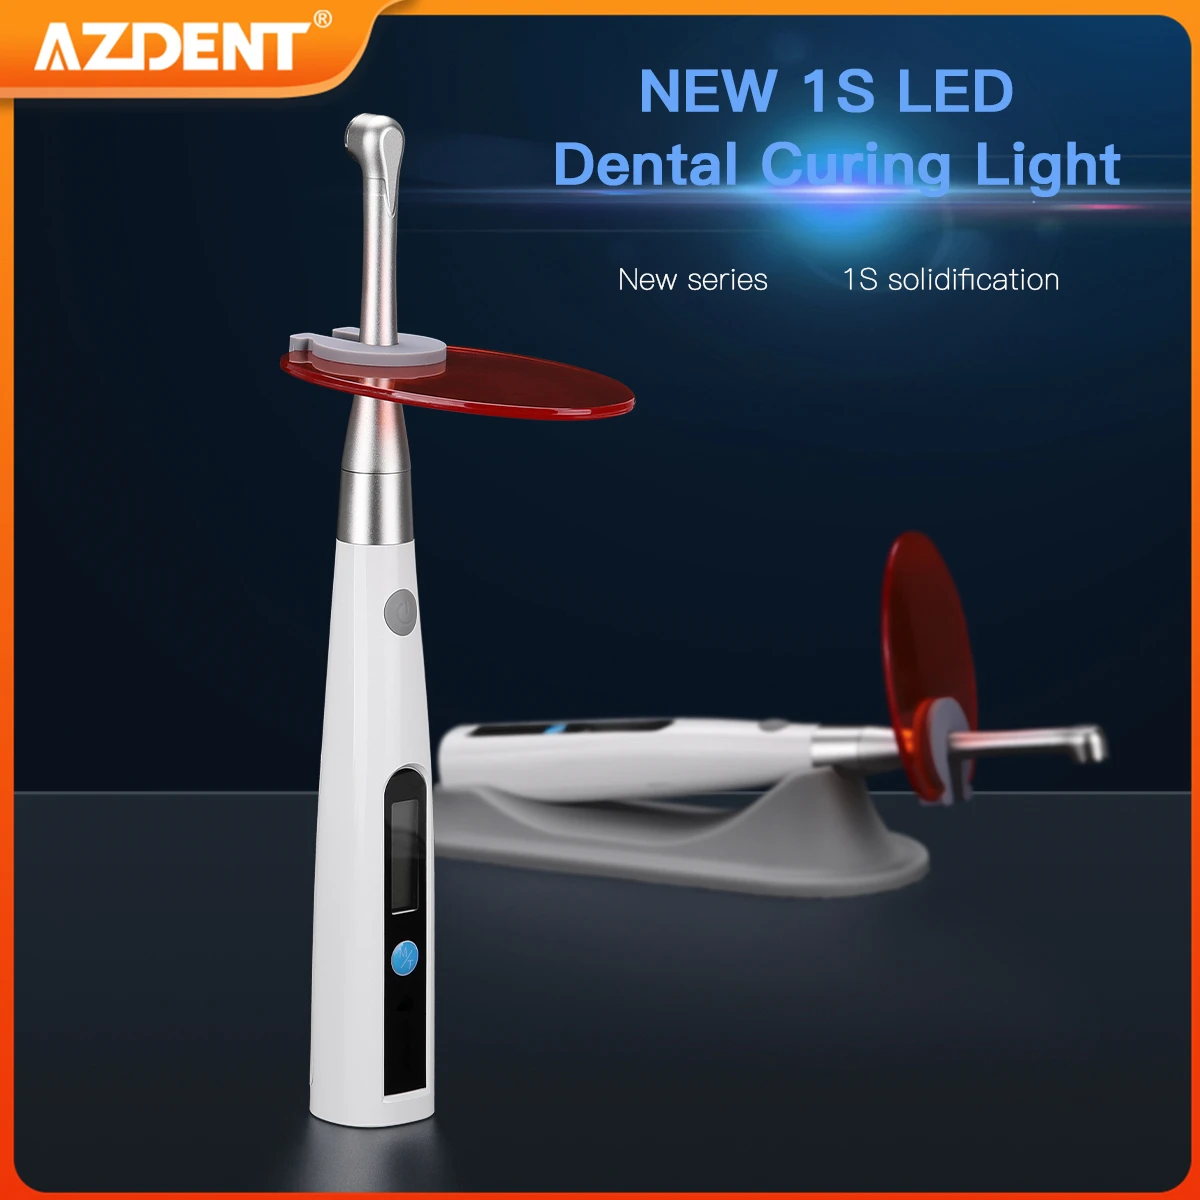 AZDENT Dental Curing Light LED Lamp Cordless 1S Cure 360° Metal Head 800-1400mw/cm² 3 Modes 100-240V Dentistry Instrument Tool